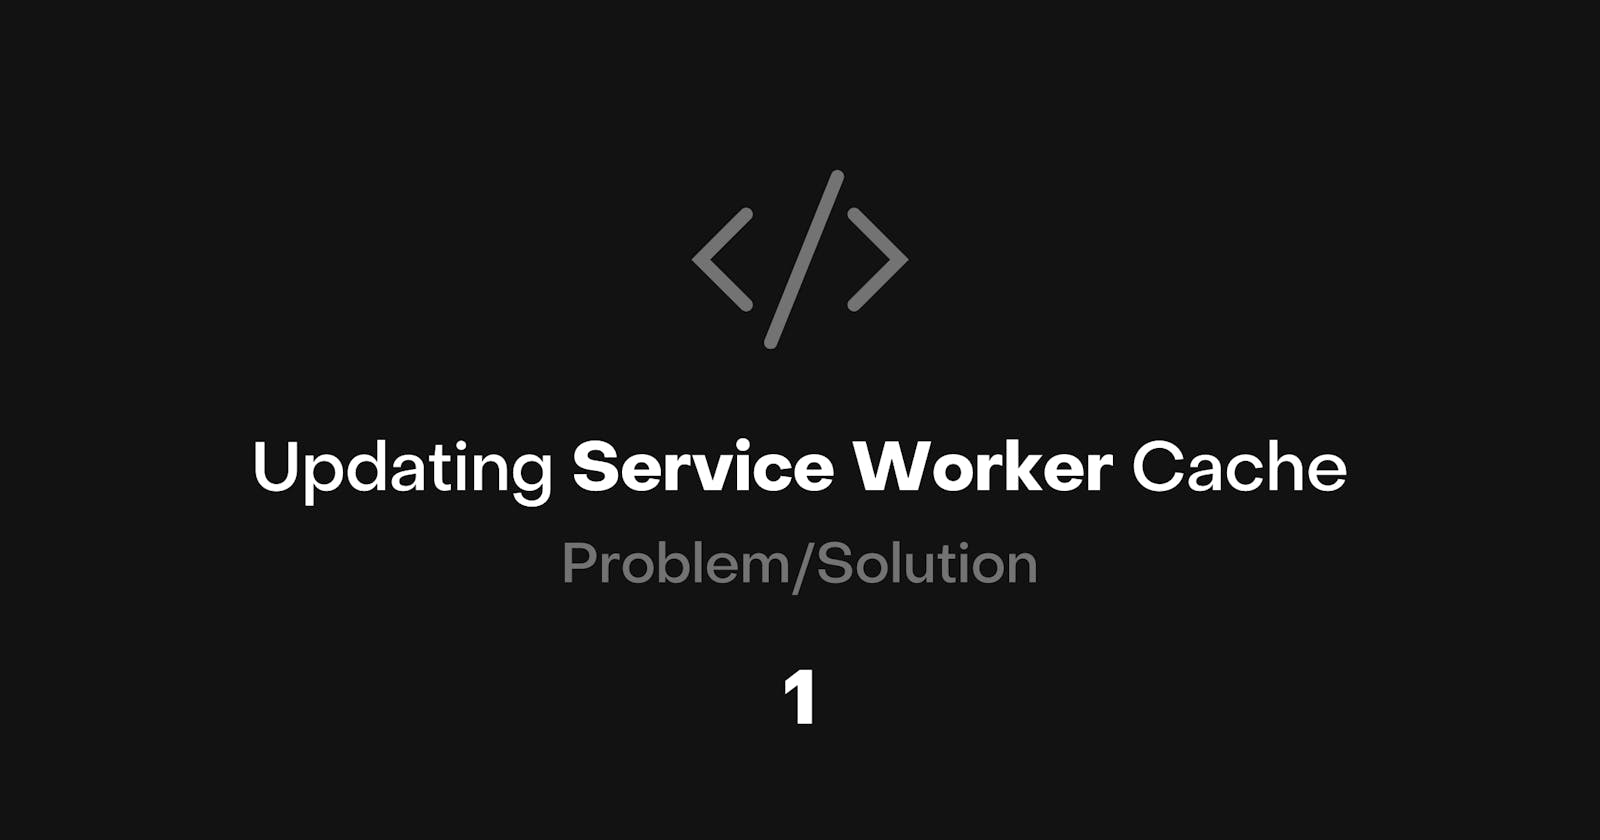 How To Invalidate Service Worker Cache On Every Update?